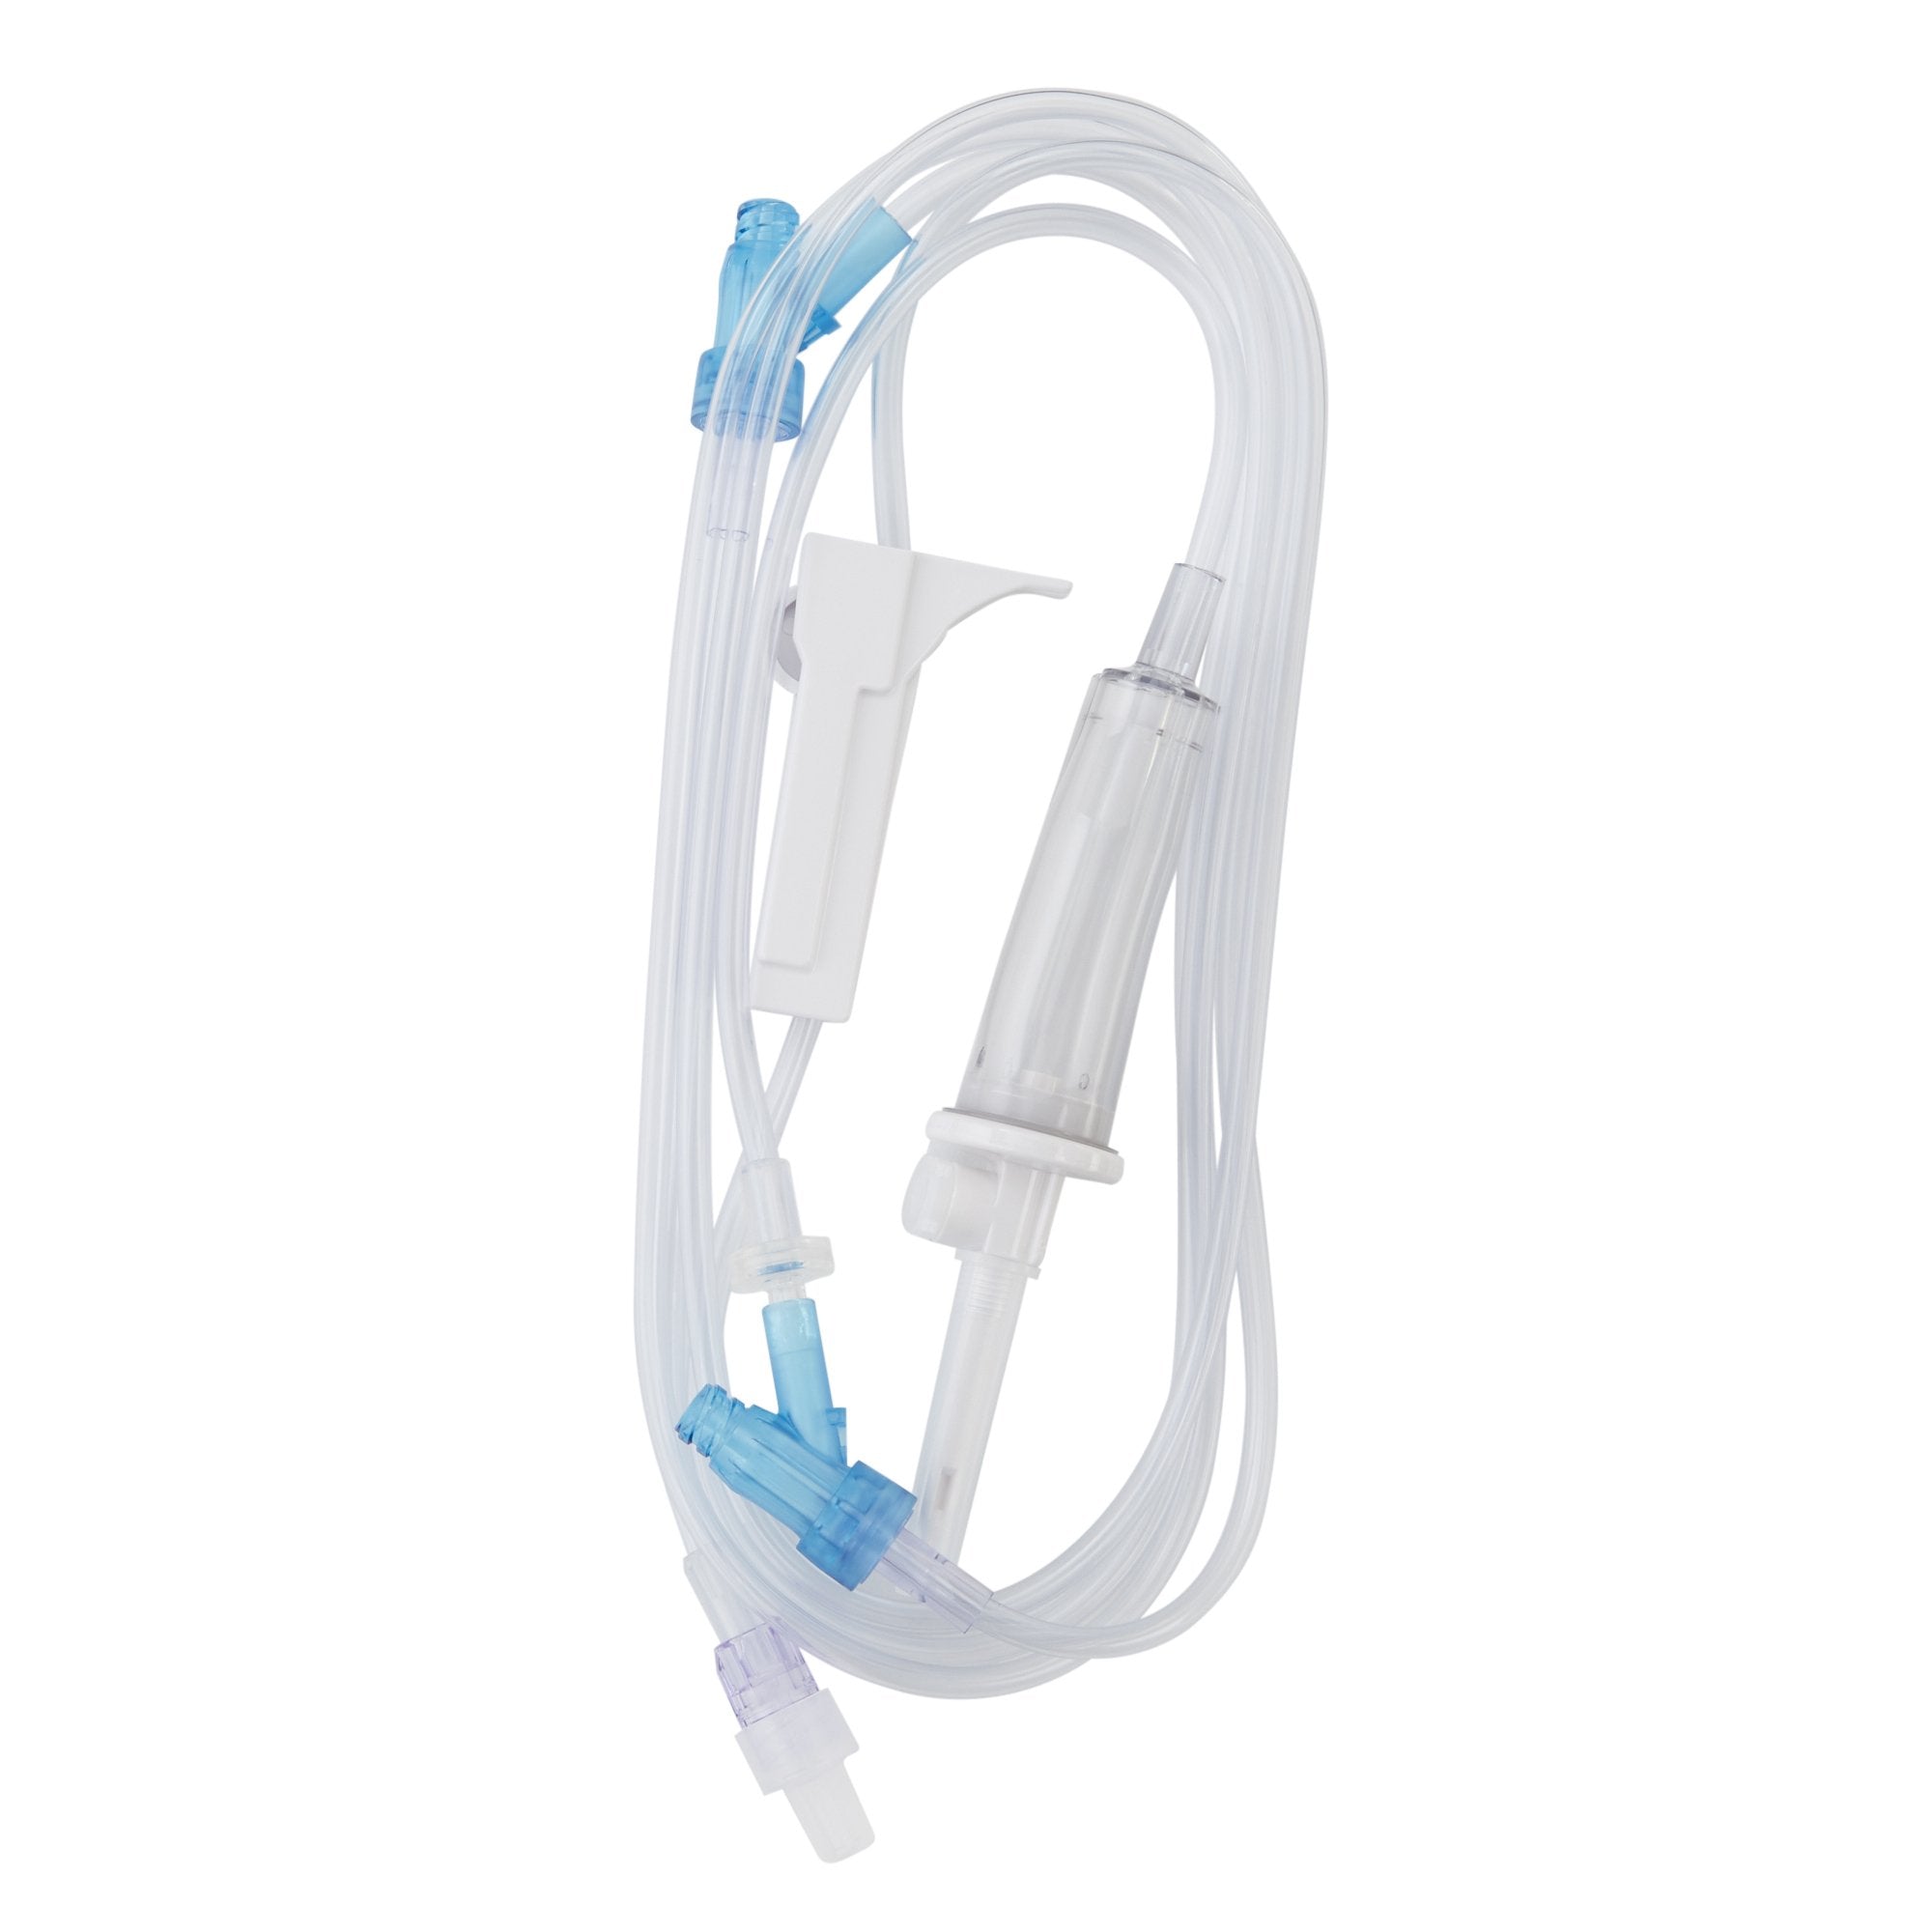 Primary IV Administration Set SafeDay Gravity 2 Ports 15 Drops / mL Drip Rate Without Filter 84 Inch Tubing Solution